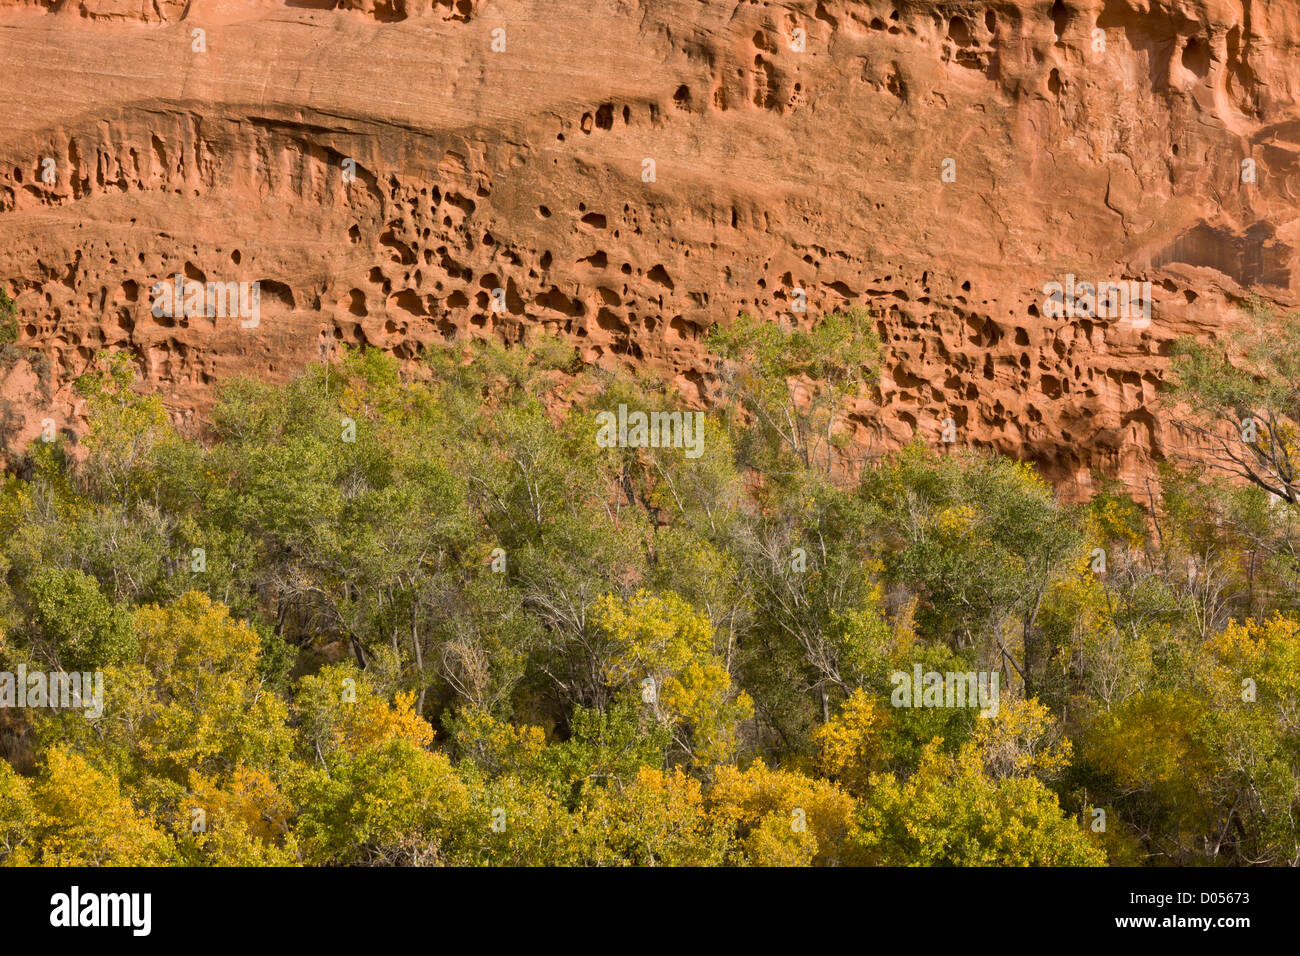 'Swiss Cheese' erosion in Red Wingate sandstone, Long Canyon, near Boulder, Grand Staircase-Escalante National Monument, Utah Stock Photo